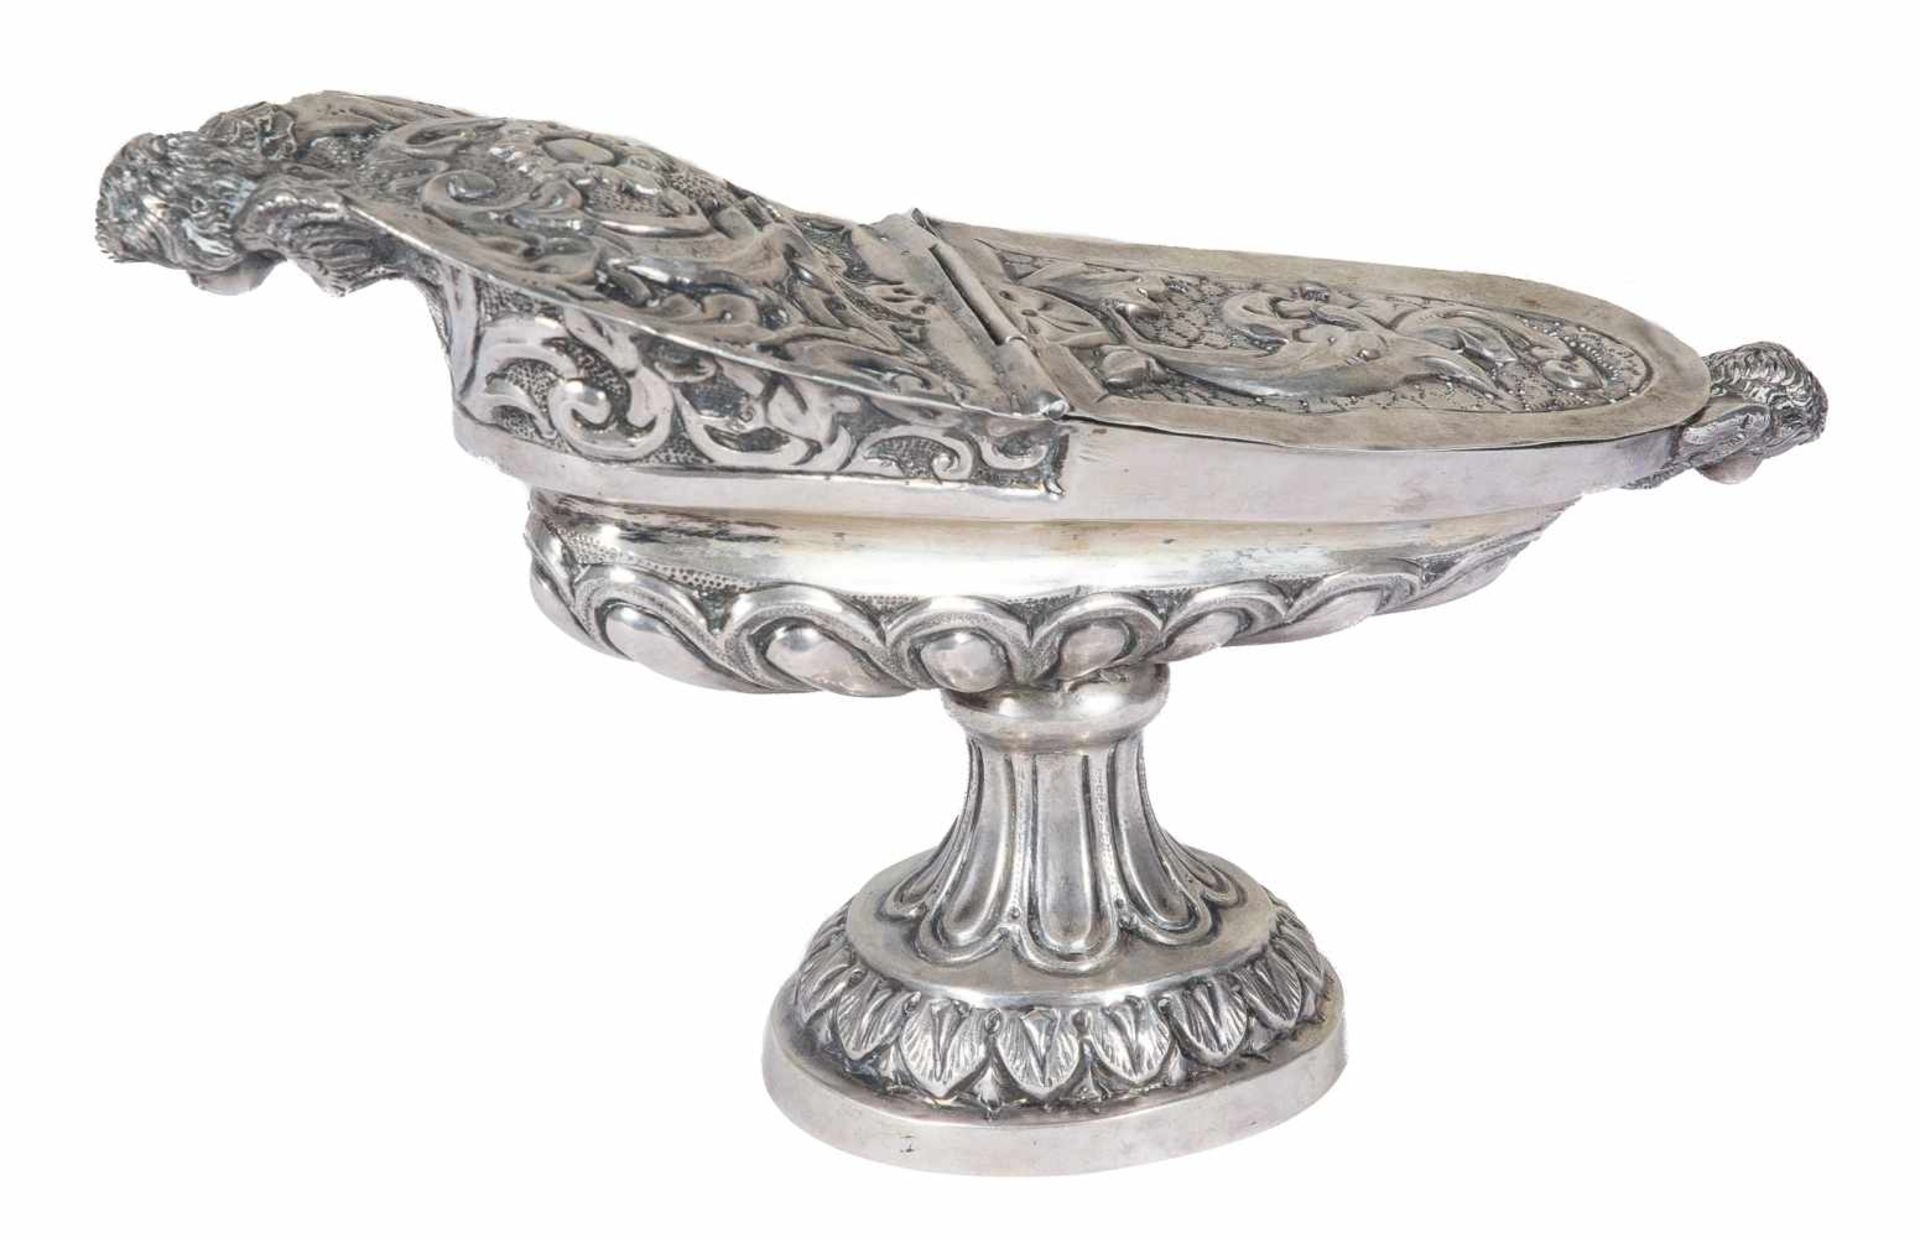 Embossed and chased silver incense burner. Marked. Possibly Italian. 17th – 18th century. 13,5 x